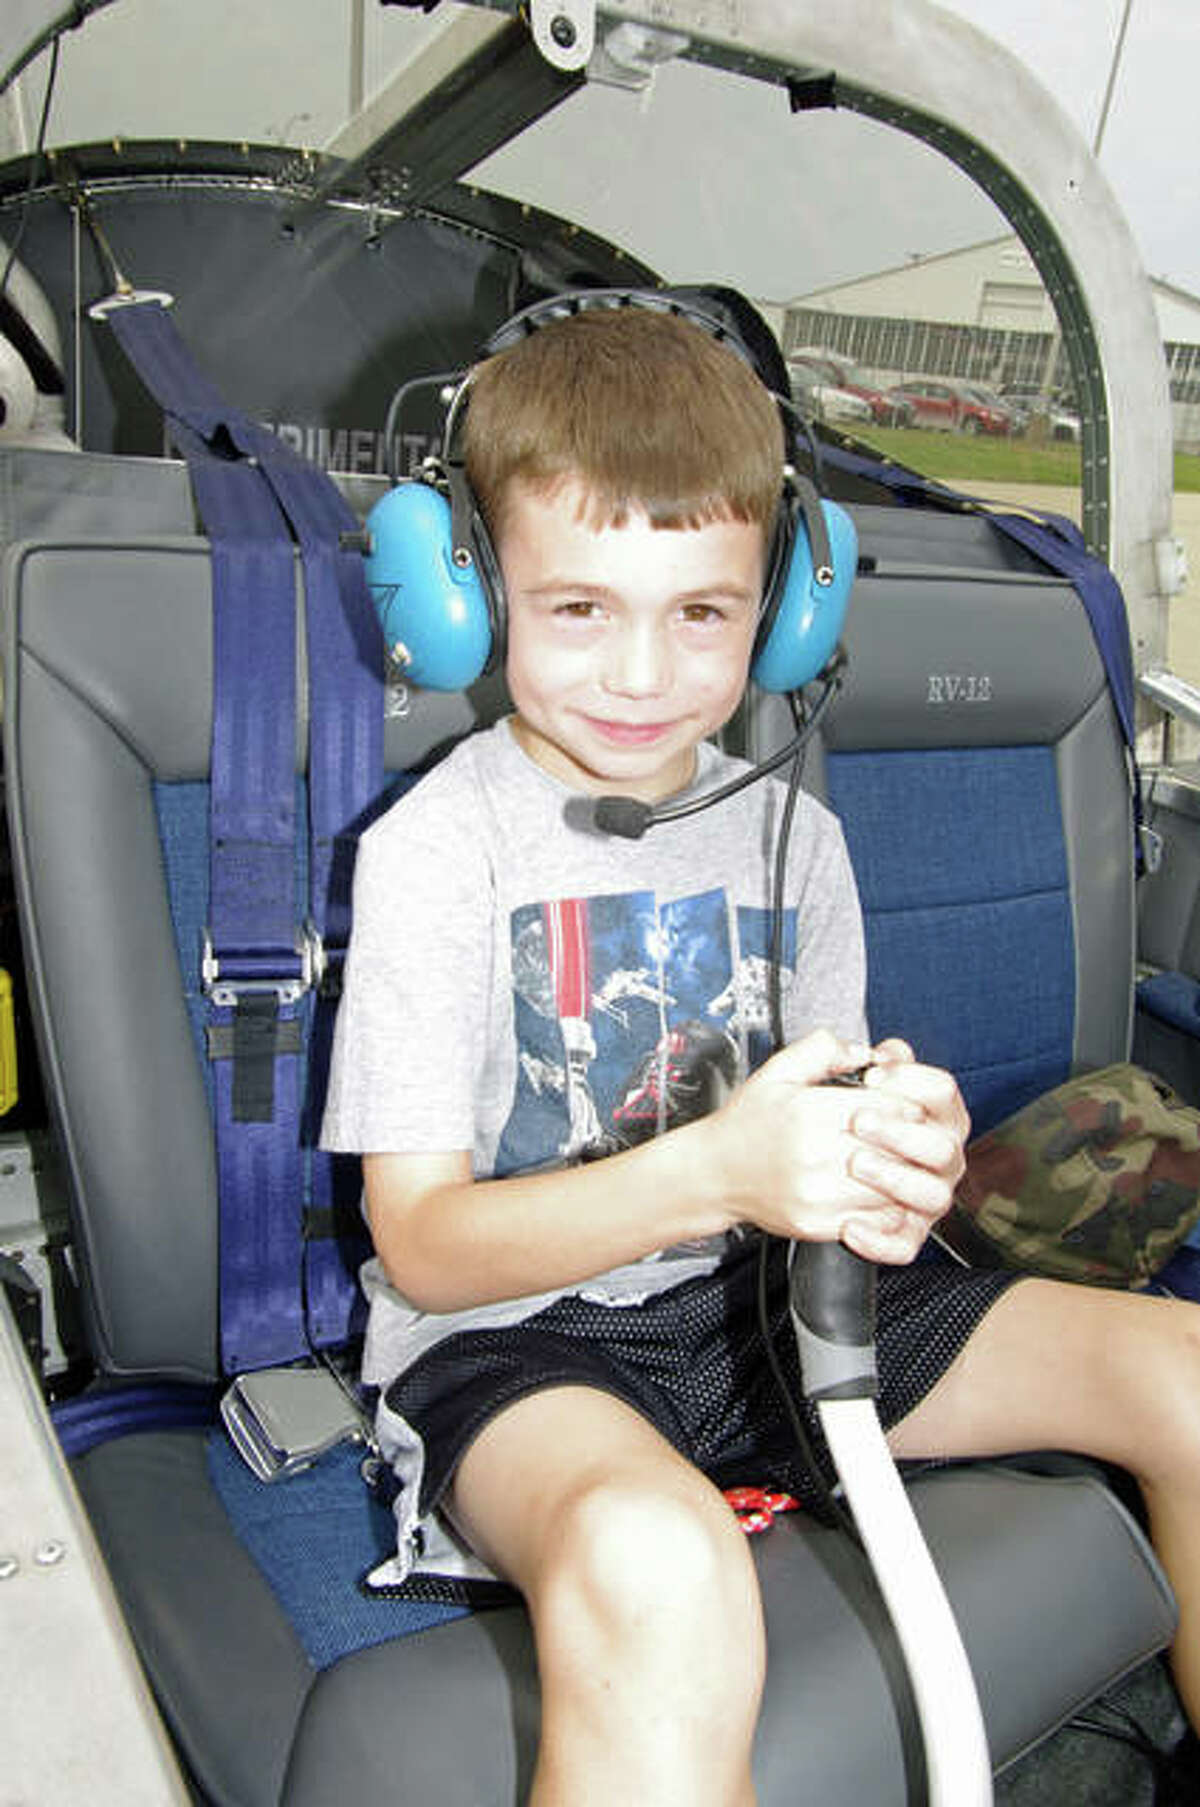 Six-year-old Abram Dabbs of Godfrey tries the control stick inside of an airplane cockpit during Saturday’s Pizza, Planes and Pilots event at St. Louis Regional Airport.